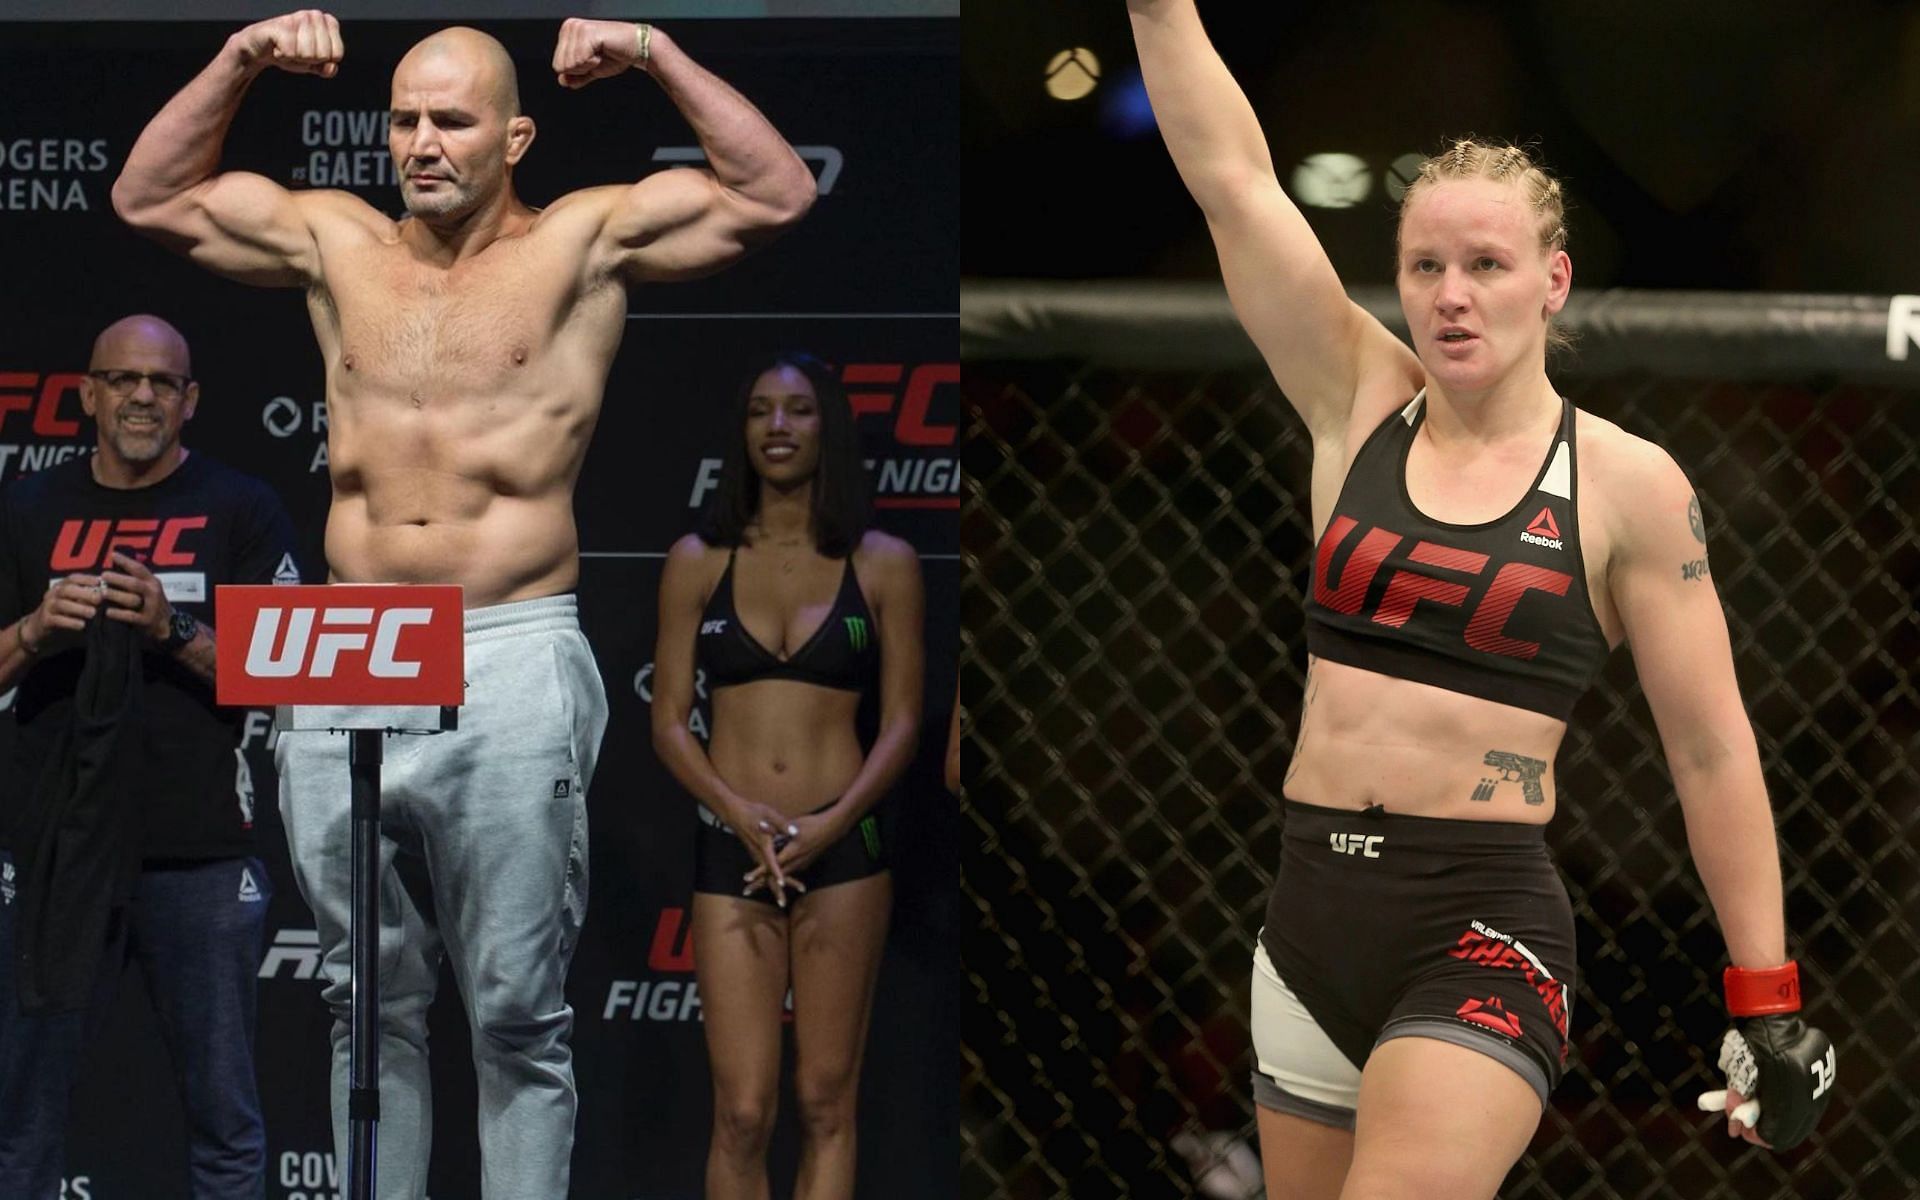 Glover Teixeira (Left) and Valentina Shevchenko (Right) (Images courtesy of @gloverteixeira Instagrama and Getty)